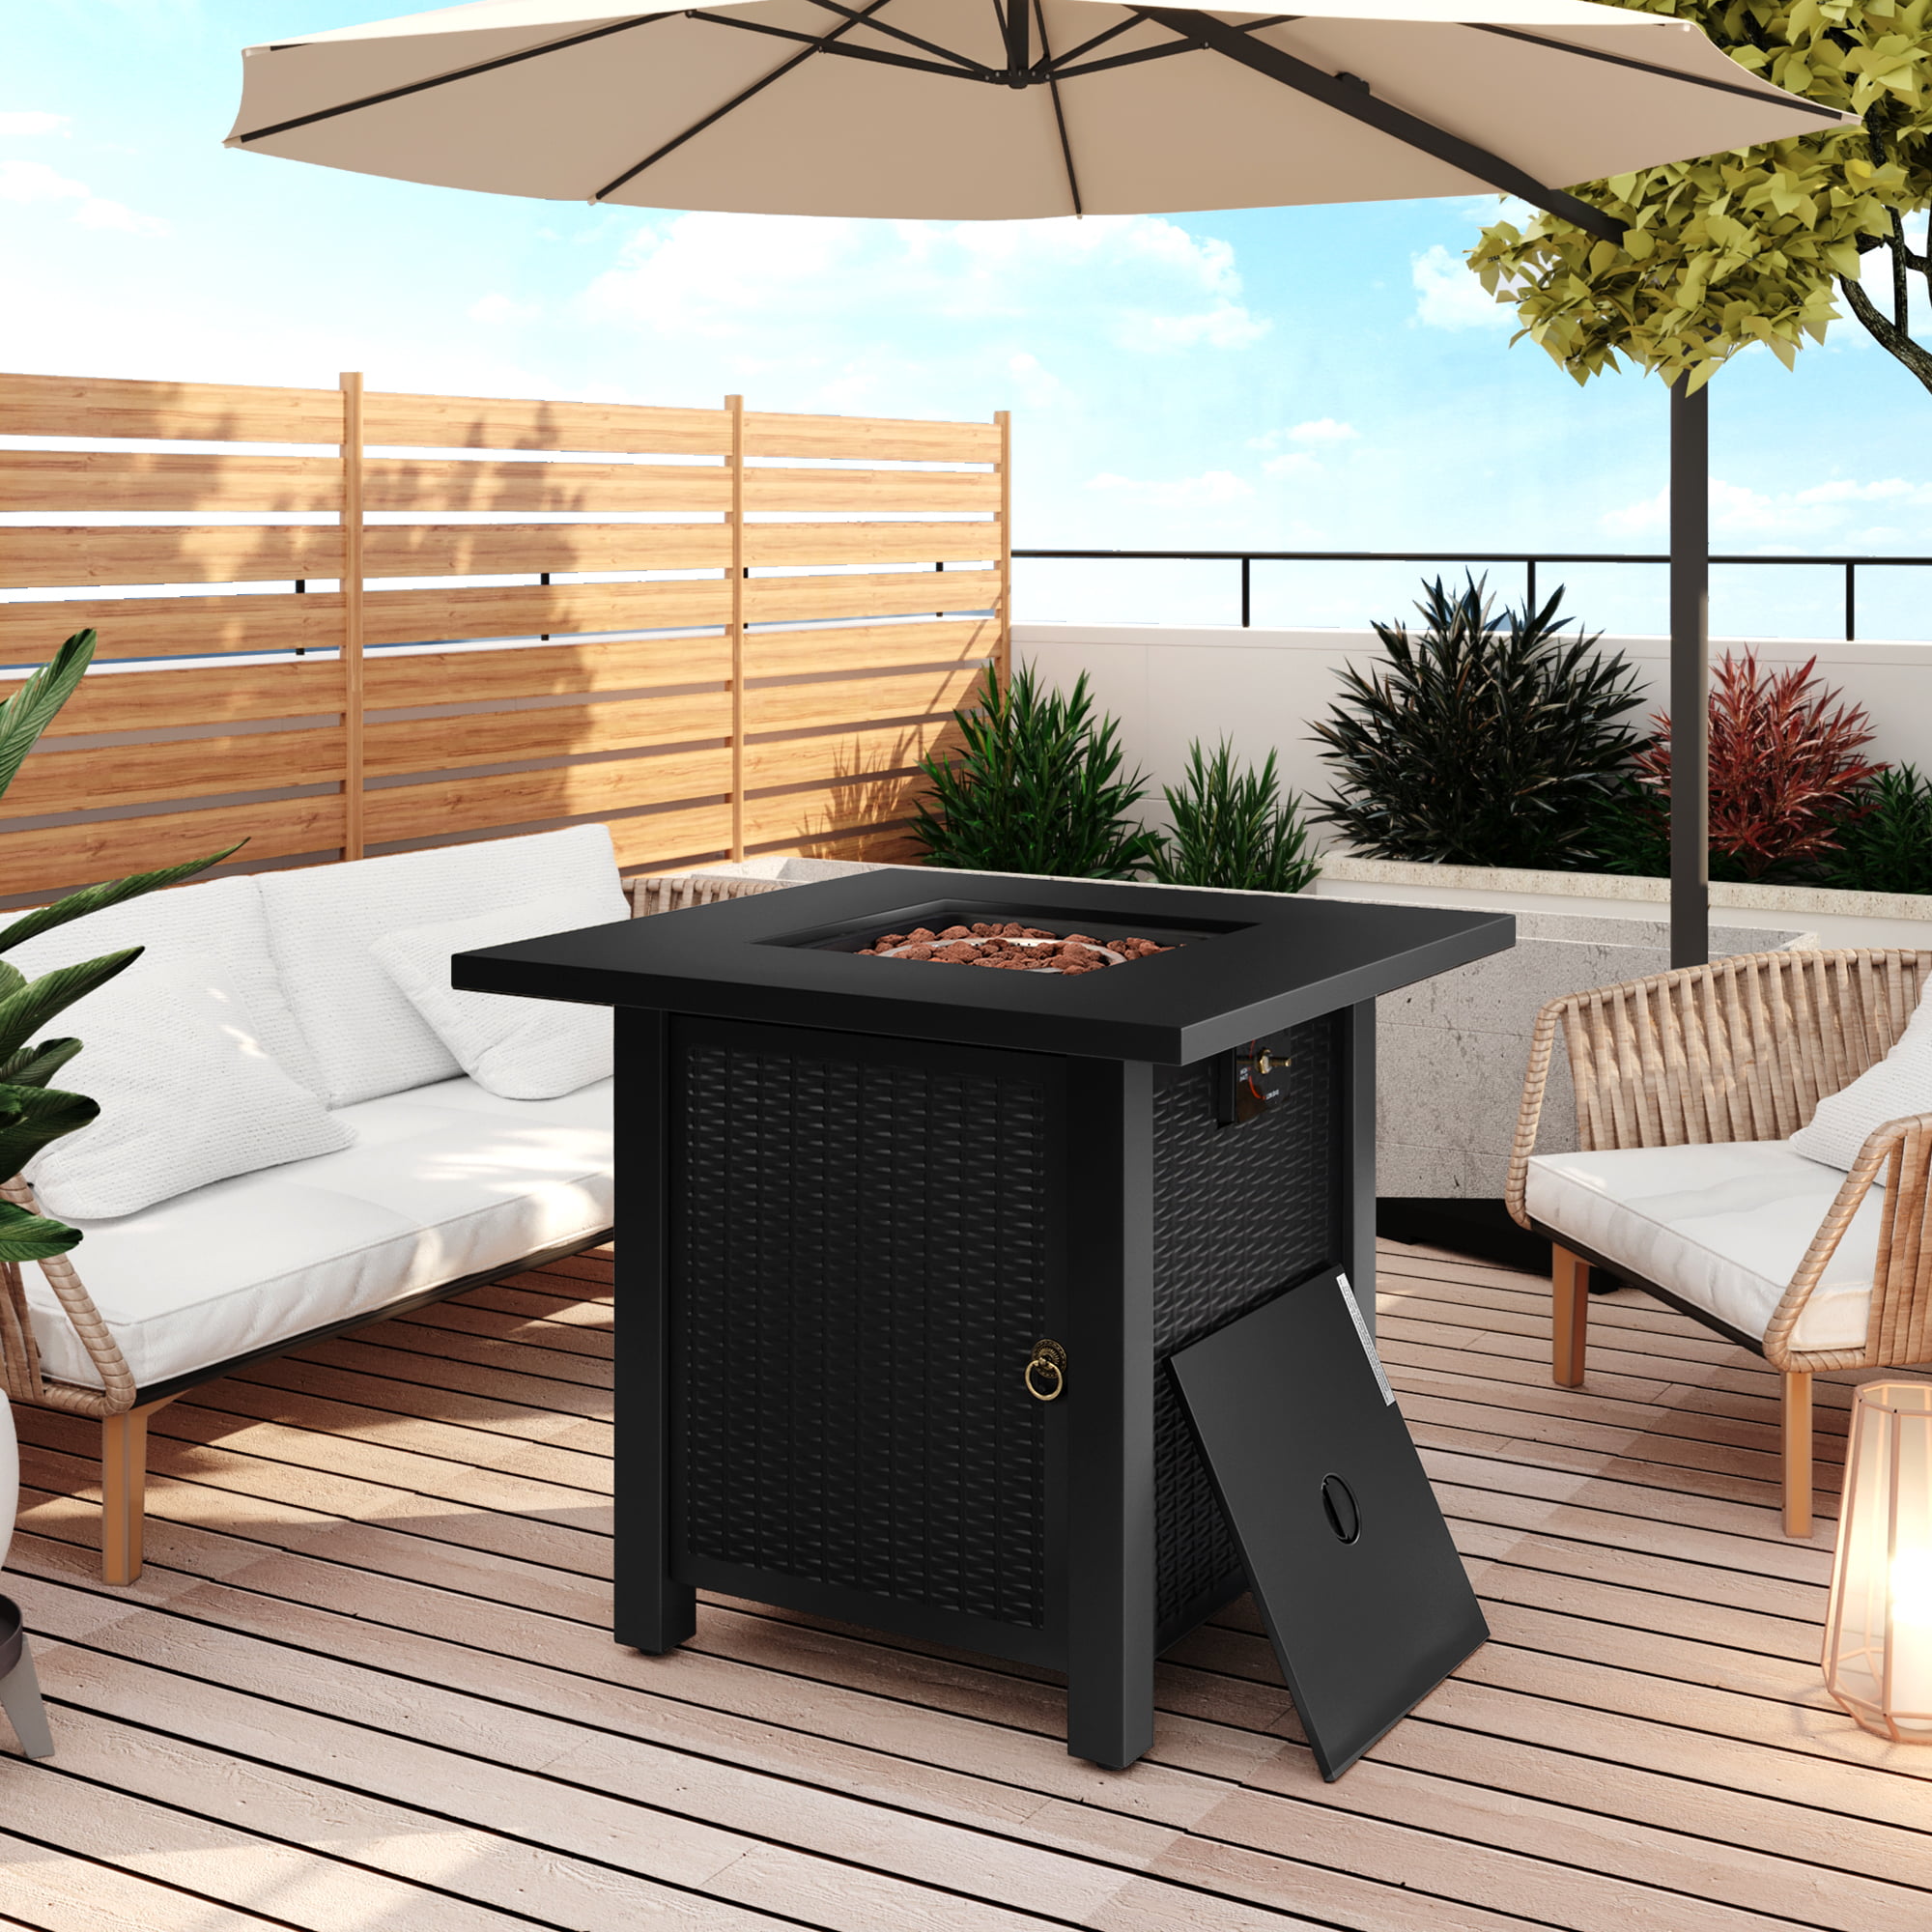 Outdoor Fire Pit Propane 28 Gas, Umbrella Table Fire Pit